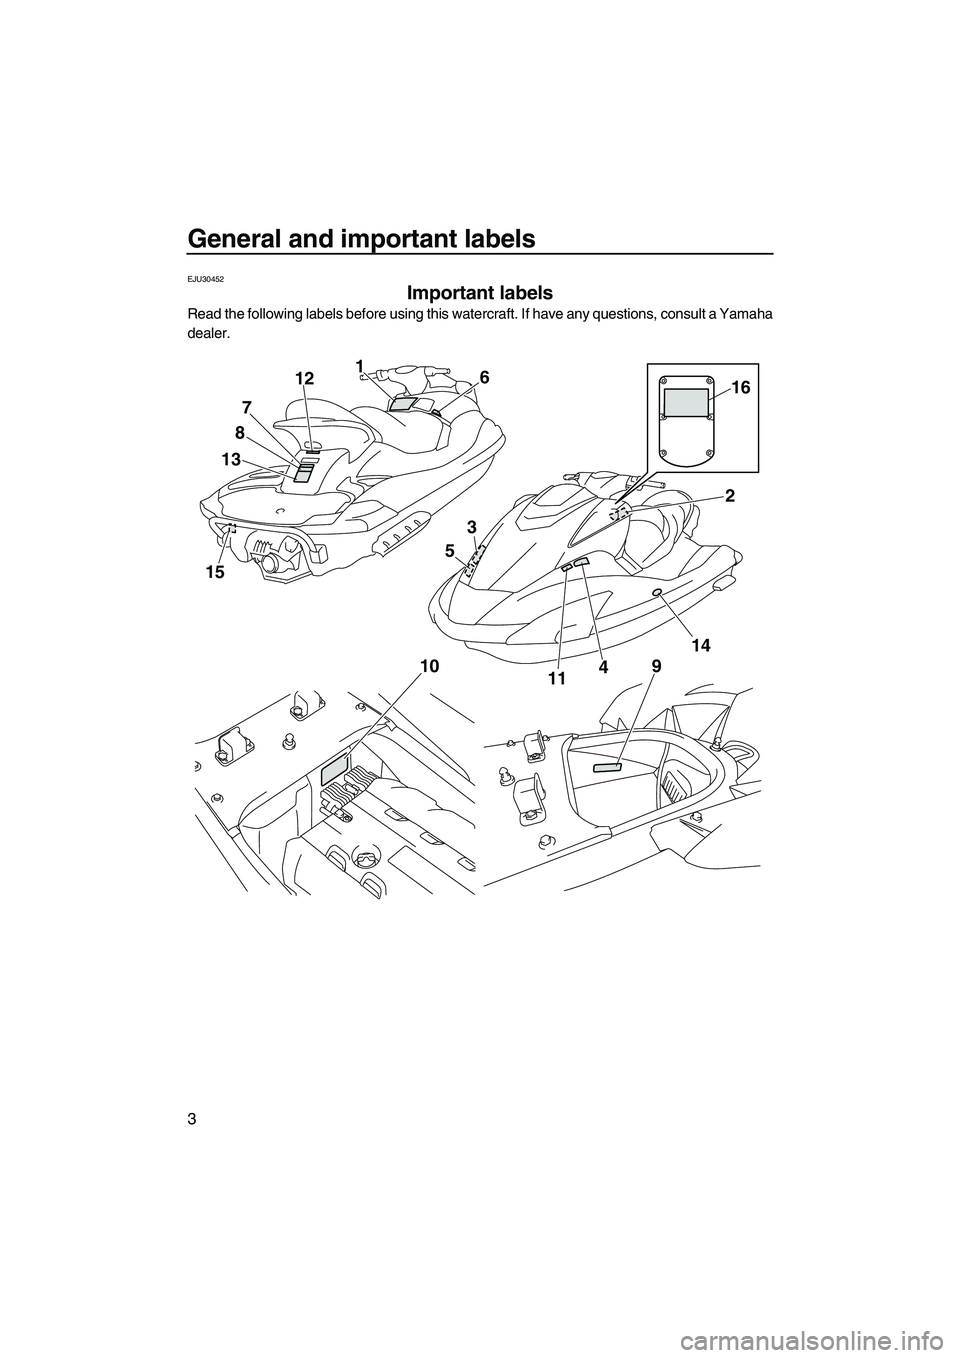 YAMAHA SVHO 2010  Owners Manual General and important labels
3
EJU30452
Important labels 
Read the following labels before using this watercraft. If have any questions, consult a Yamaha
dealer.
15
1387121
6
4
10914216
3
511
UF1W72E0